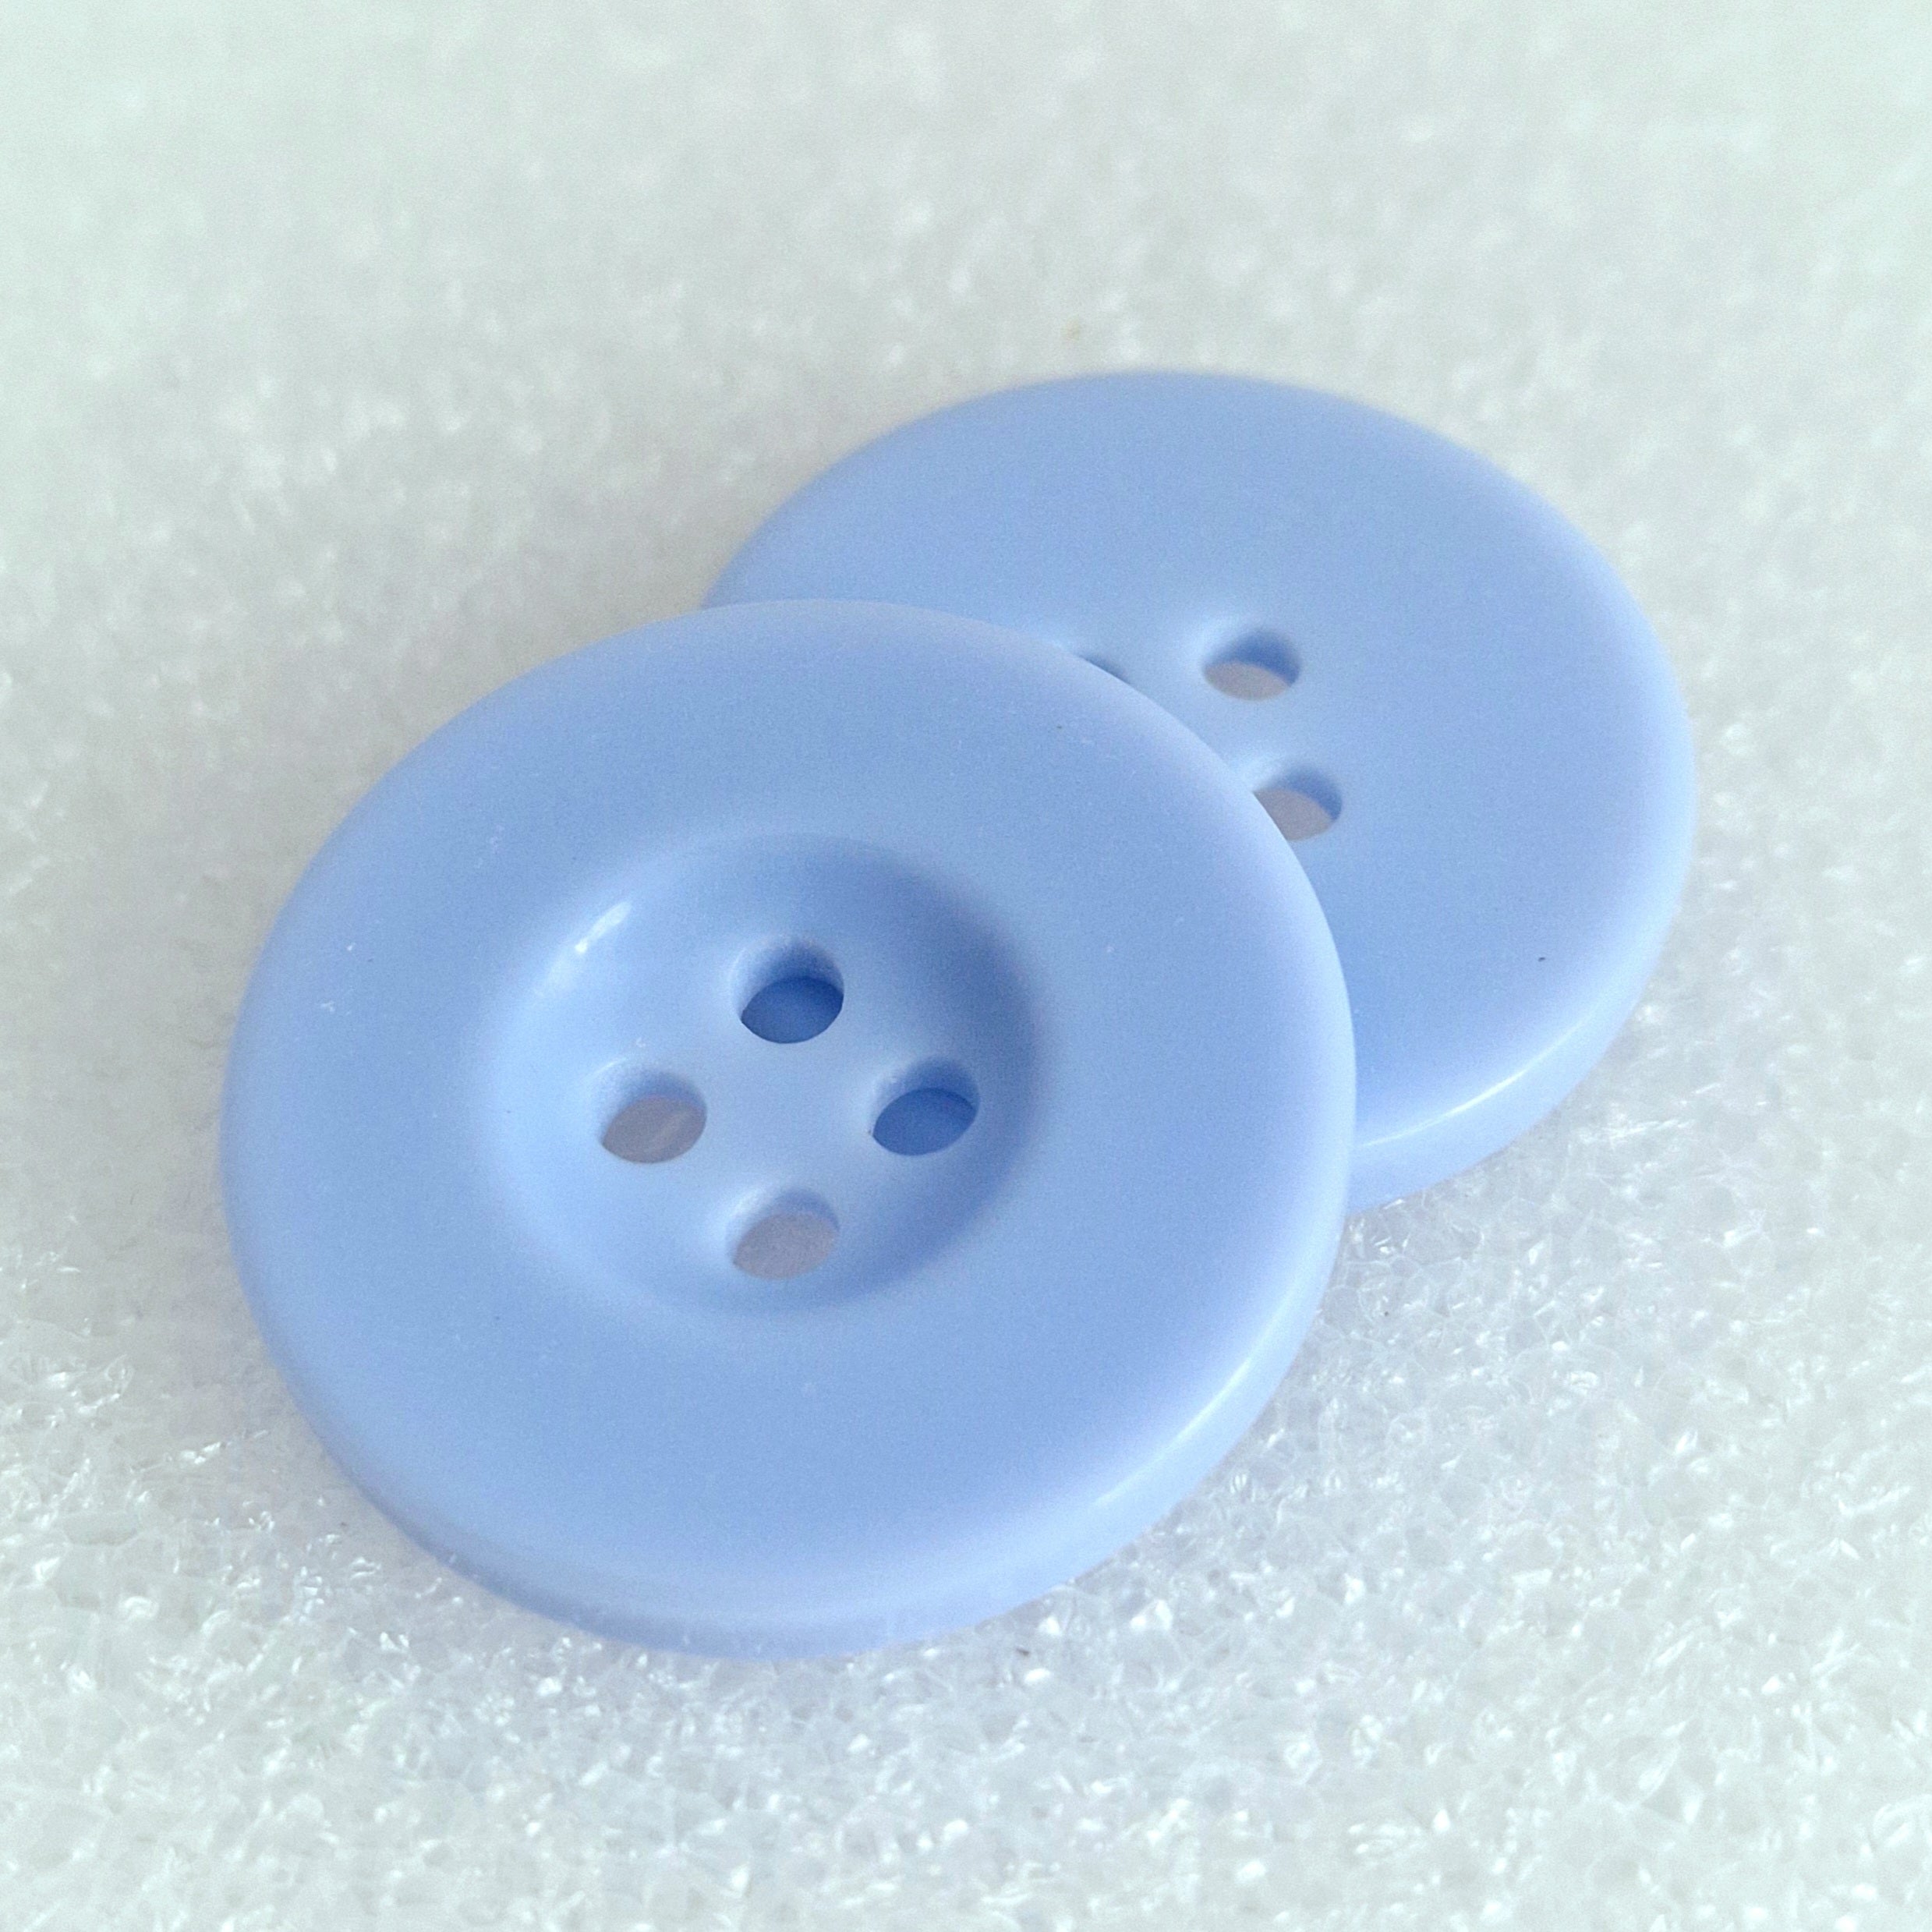 MajorCrafts 16pcs 25mm Light Blue 4 Holes Round Resin Sewing Buttons